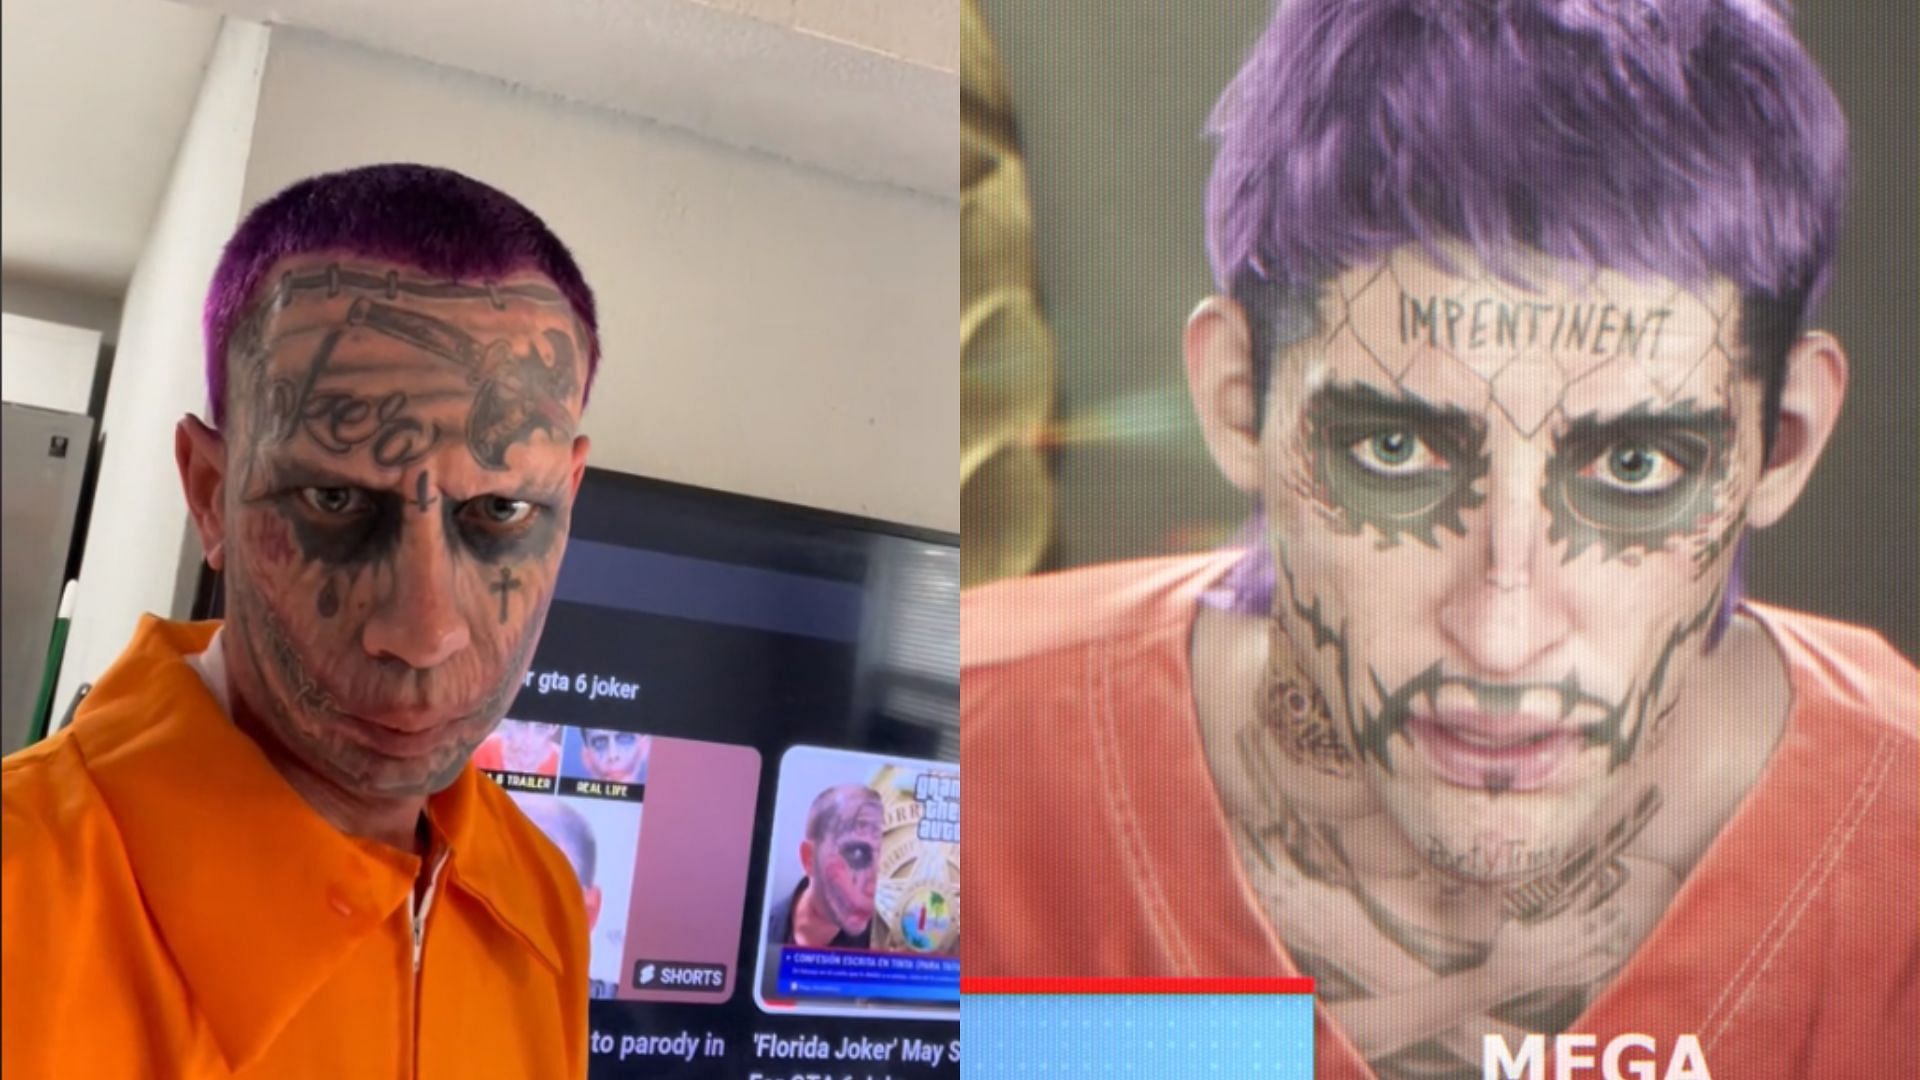 The Florida Joker&rsquo;s new look and the Grand Theft Auto 6 trailer character (Images via TikTok/@lawrence.sullivan0, Rockstar Games)